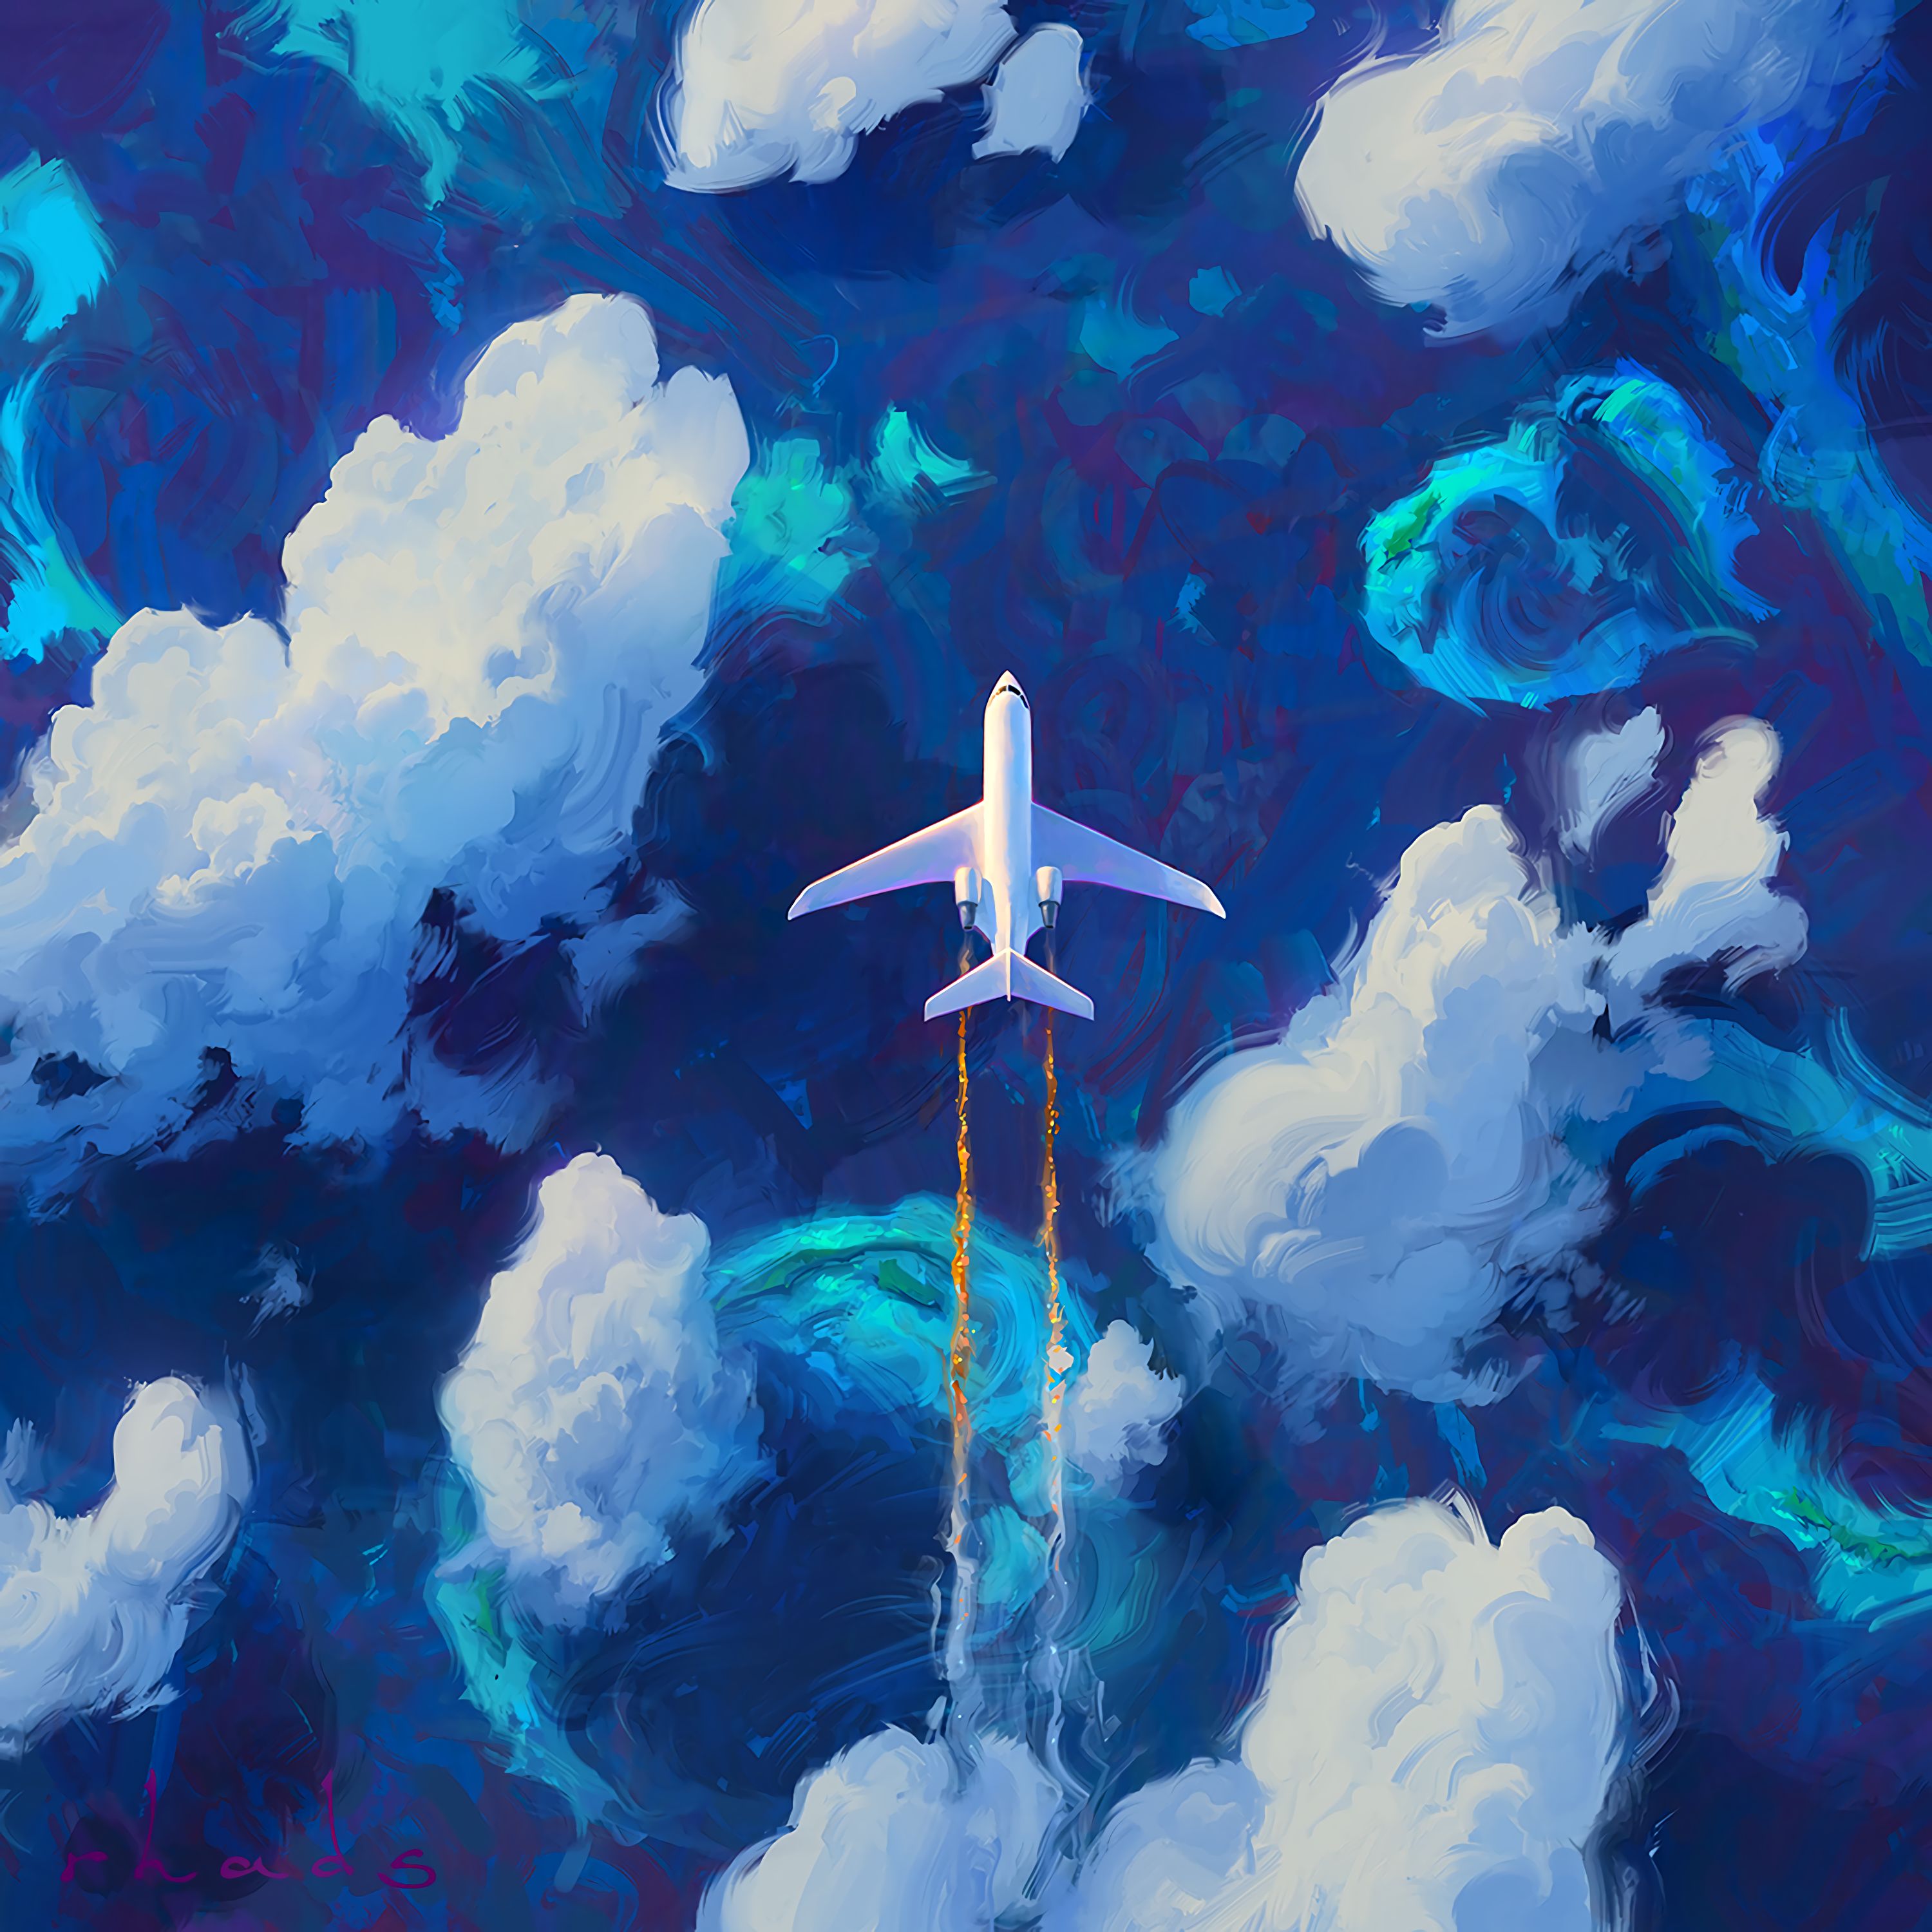 Mobile wallpaper: Art, Clouds, Plane, Airplane, Flight, Sky, 52386 download the picture for free